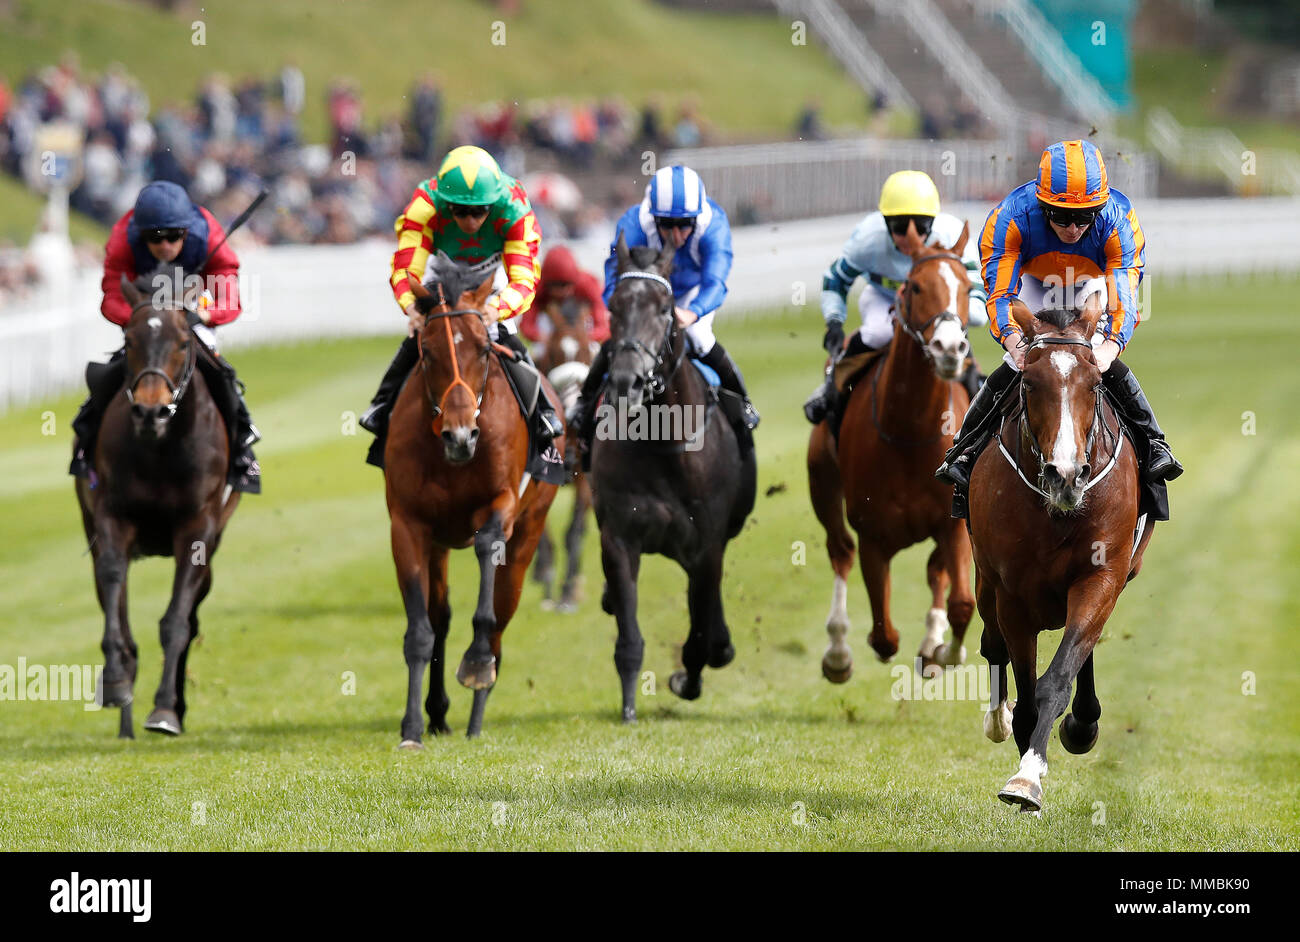 Idaho (right) ridden by Ryan Moore on their way to winning The Boodles Diamond Ormonde Stakes, during Ladies Day of the 2018 Boodles May Festival at Chester Racecourse. Stock Photo